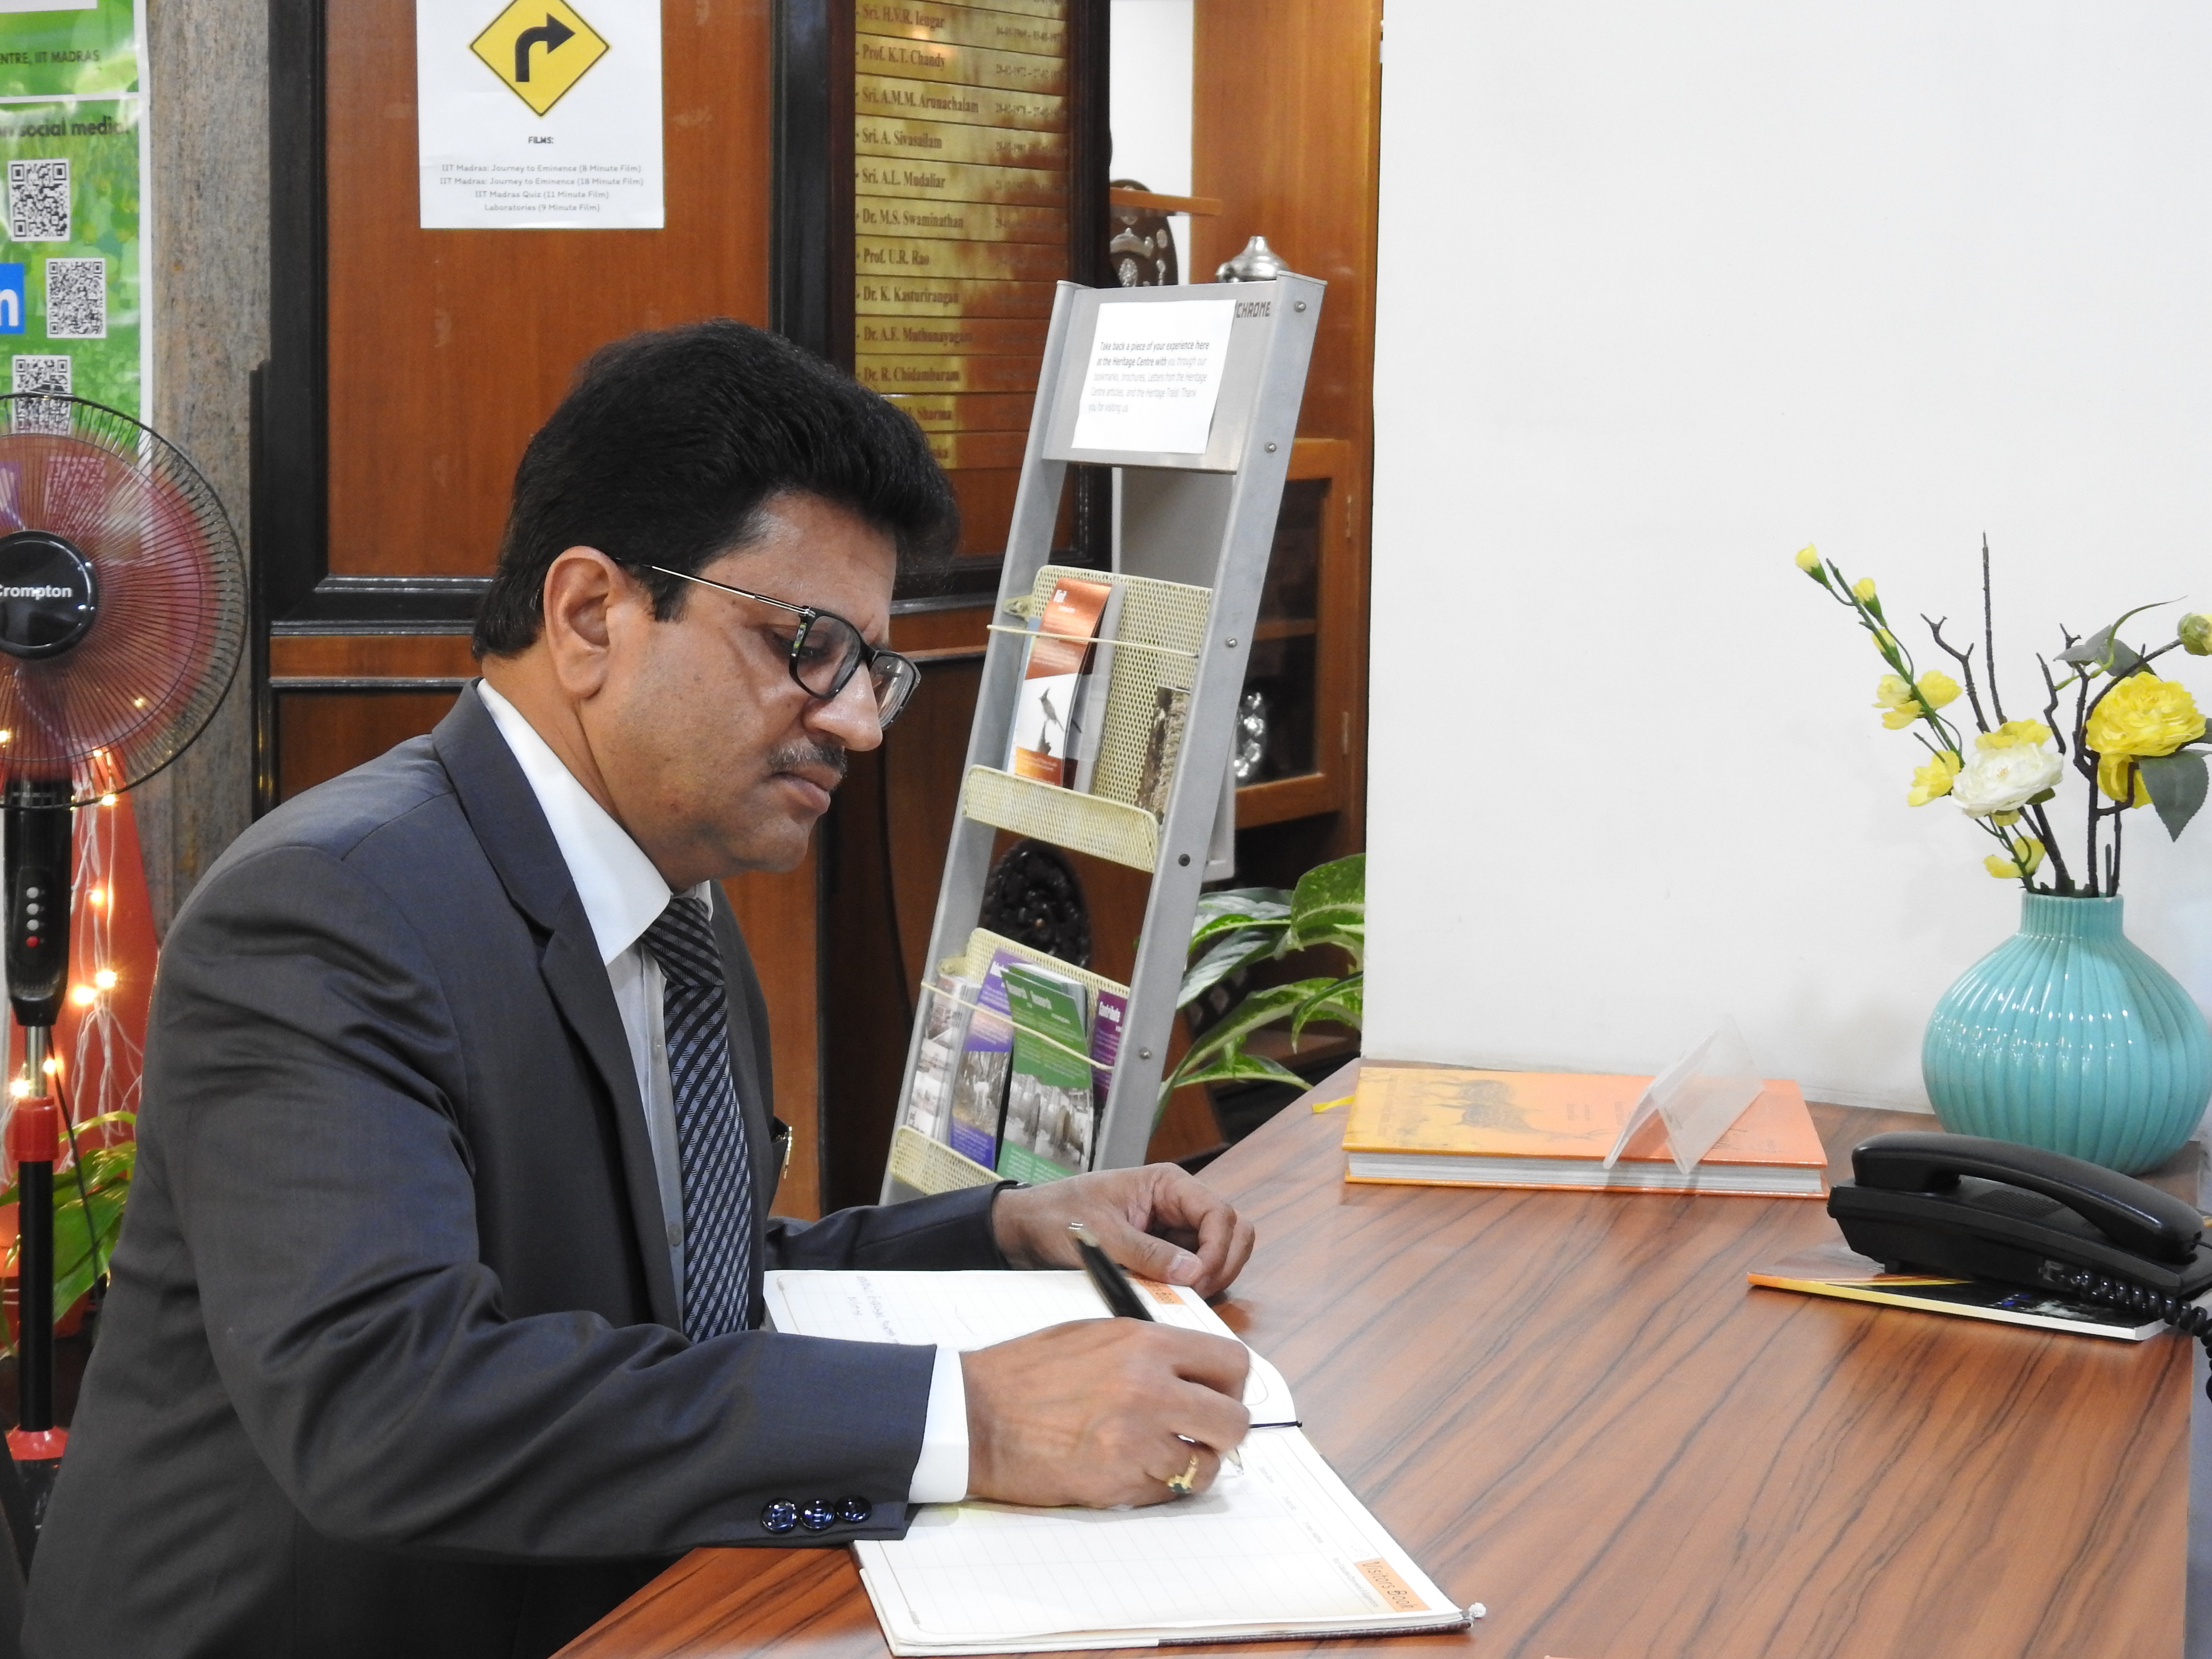 Mr. Arvind Kumar signs the Visitors' Book at the Heritage Centre